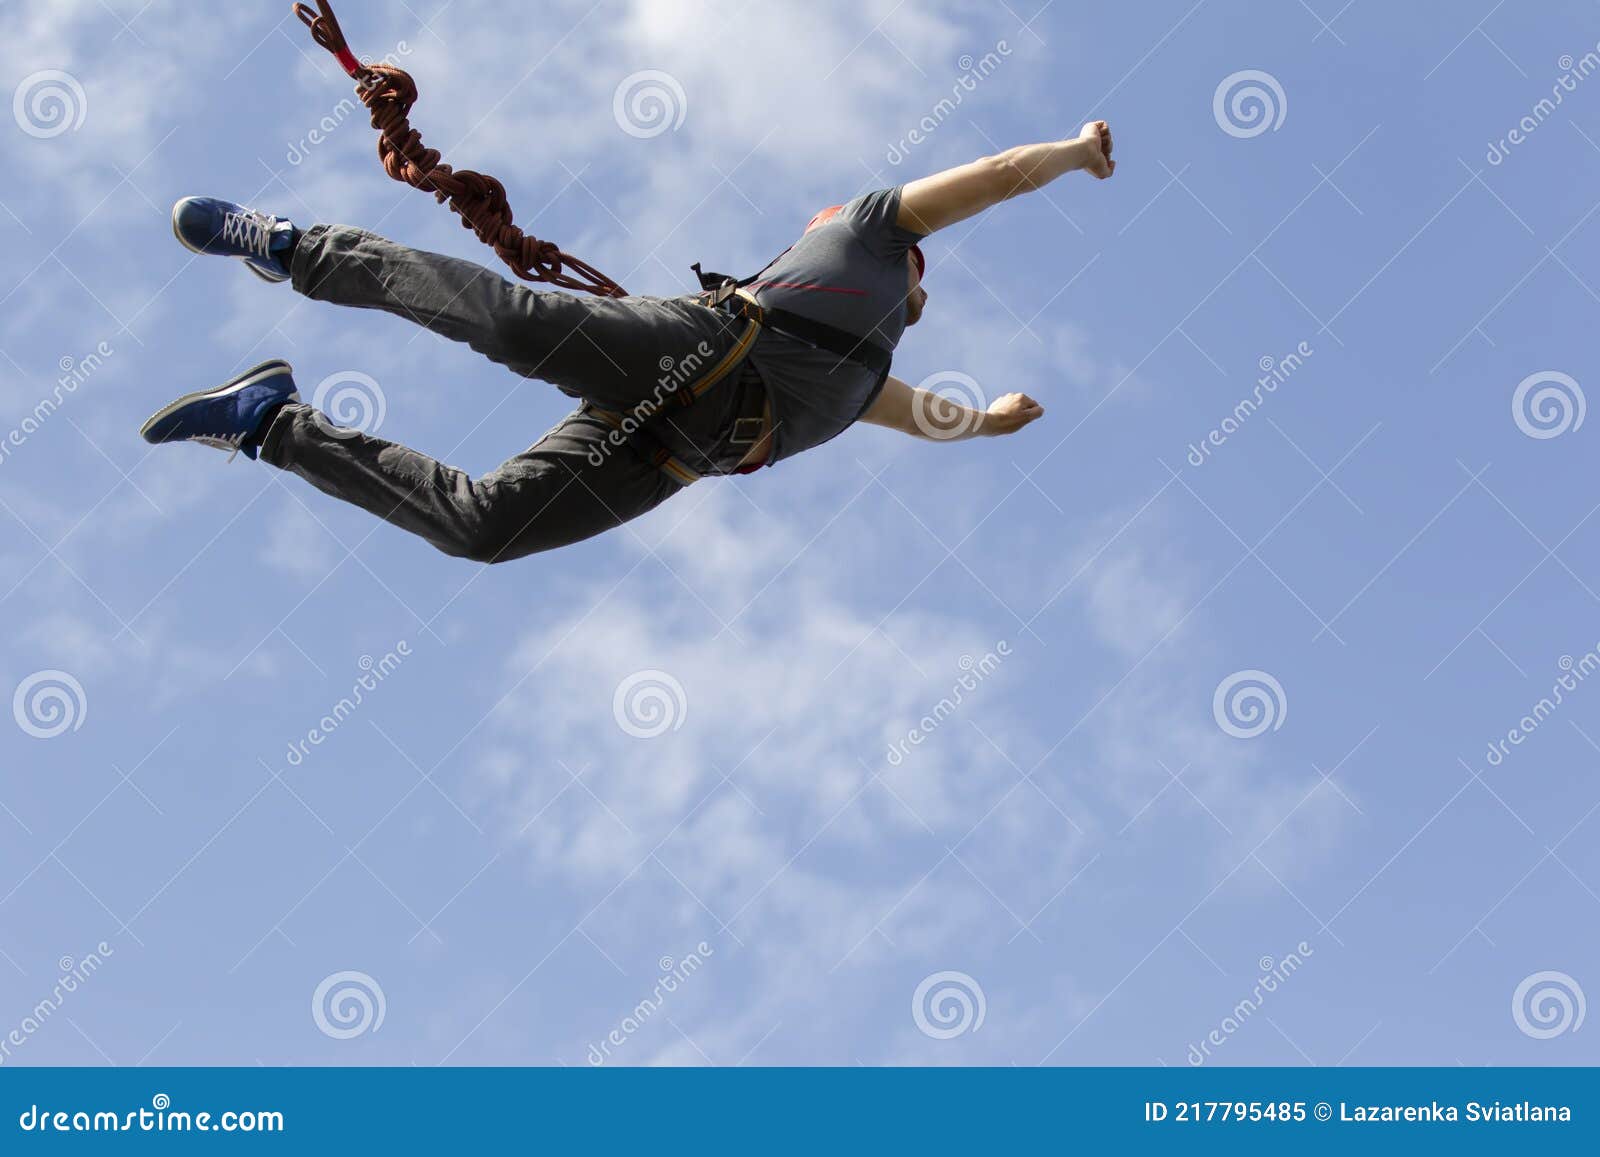 a man jumps from a bridge on a rope extreme sports editorial image image of jumping excitement 217795485